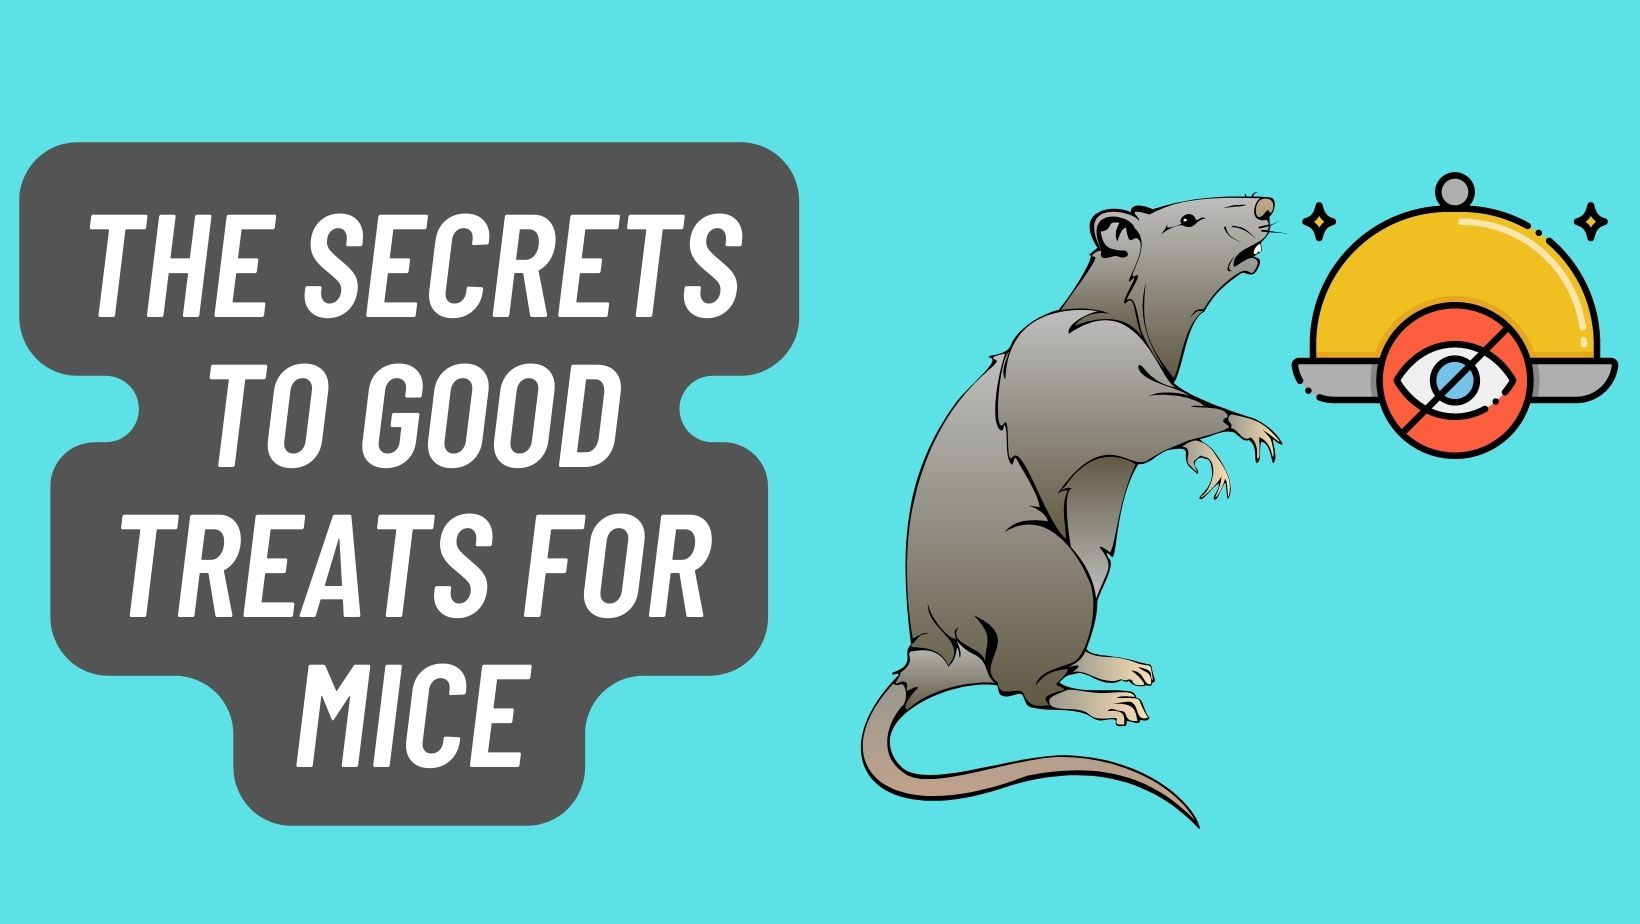 The Secrets To GOOD TREATS FOR MICE